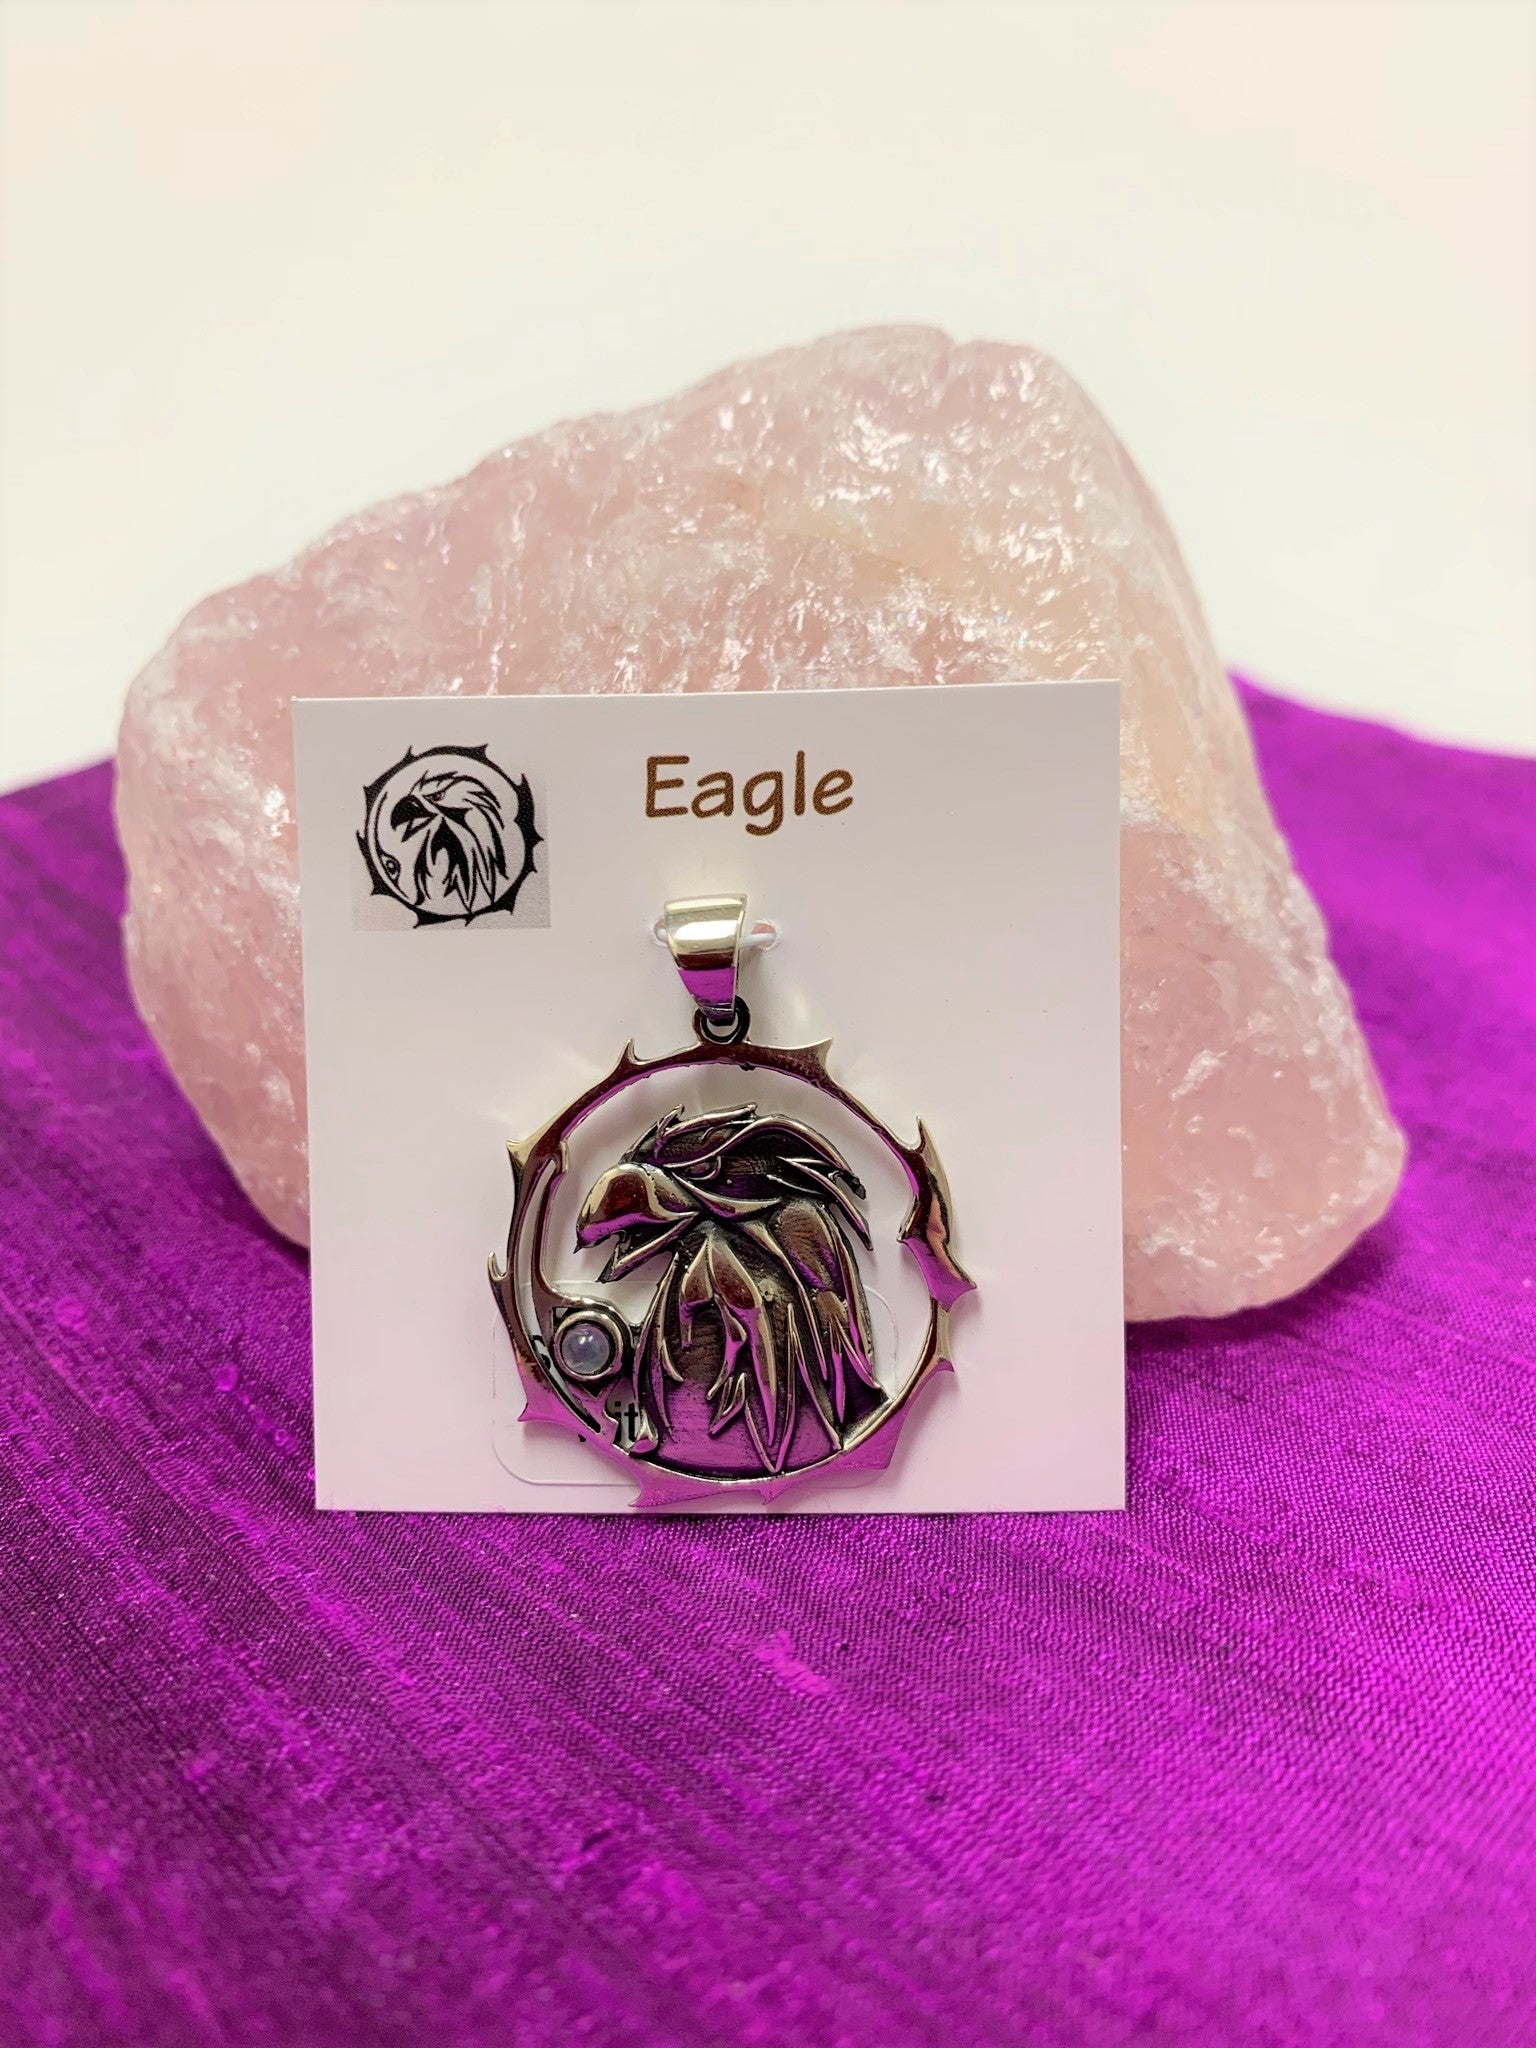 Sterling silver eagle spirit animal pendant, accented with an opal gemstone. Eagle is set within an open, stylized circle with the gemstone along the side (eagle and circle are sterling). Wear this spirit animal so you can feel its energy everywhere you go! Pendant only - necklace chain not included. 